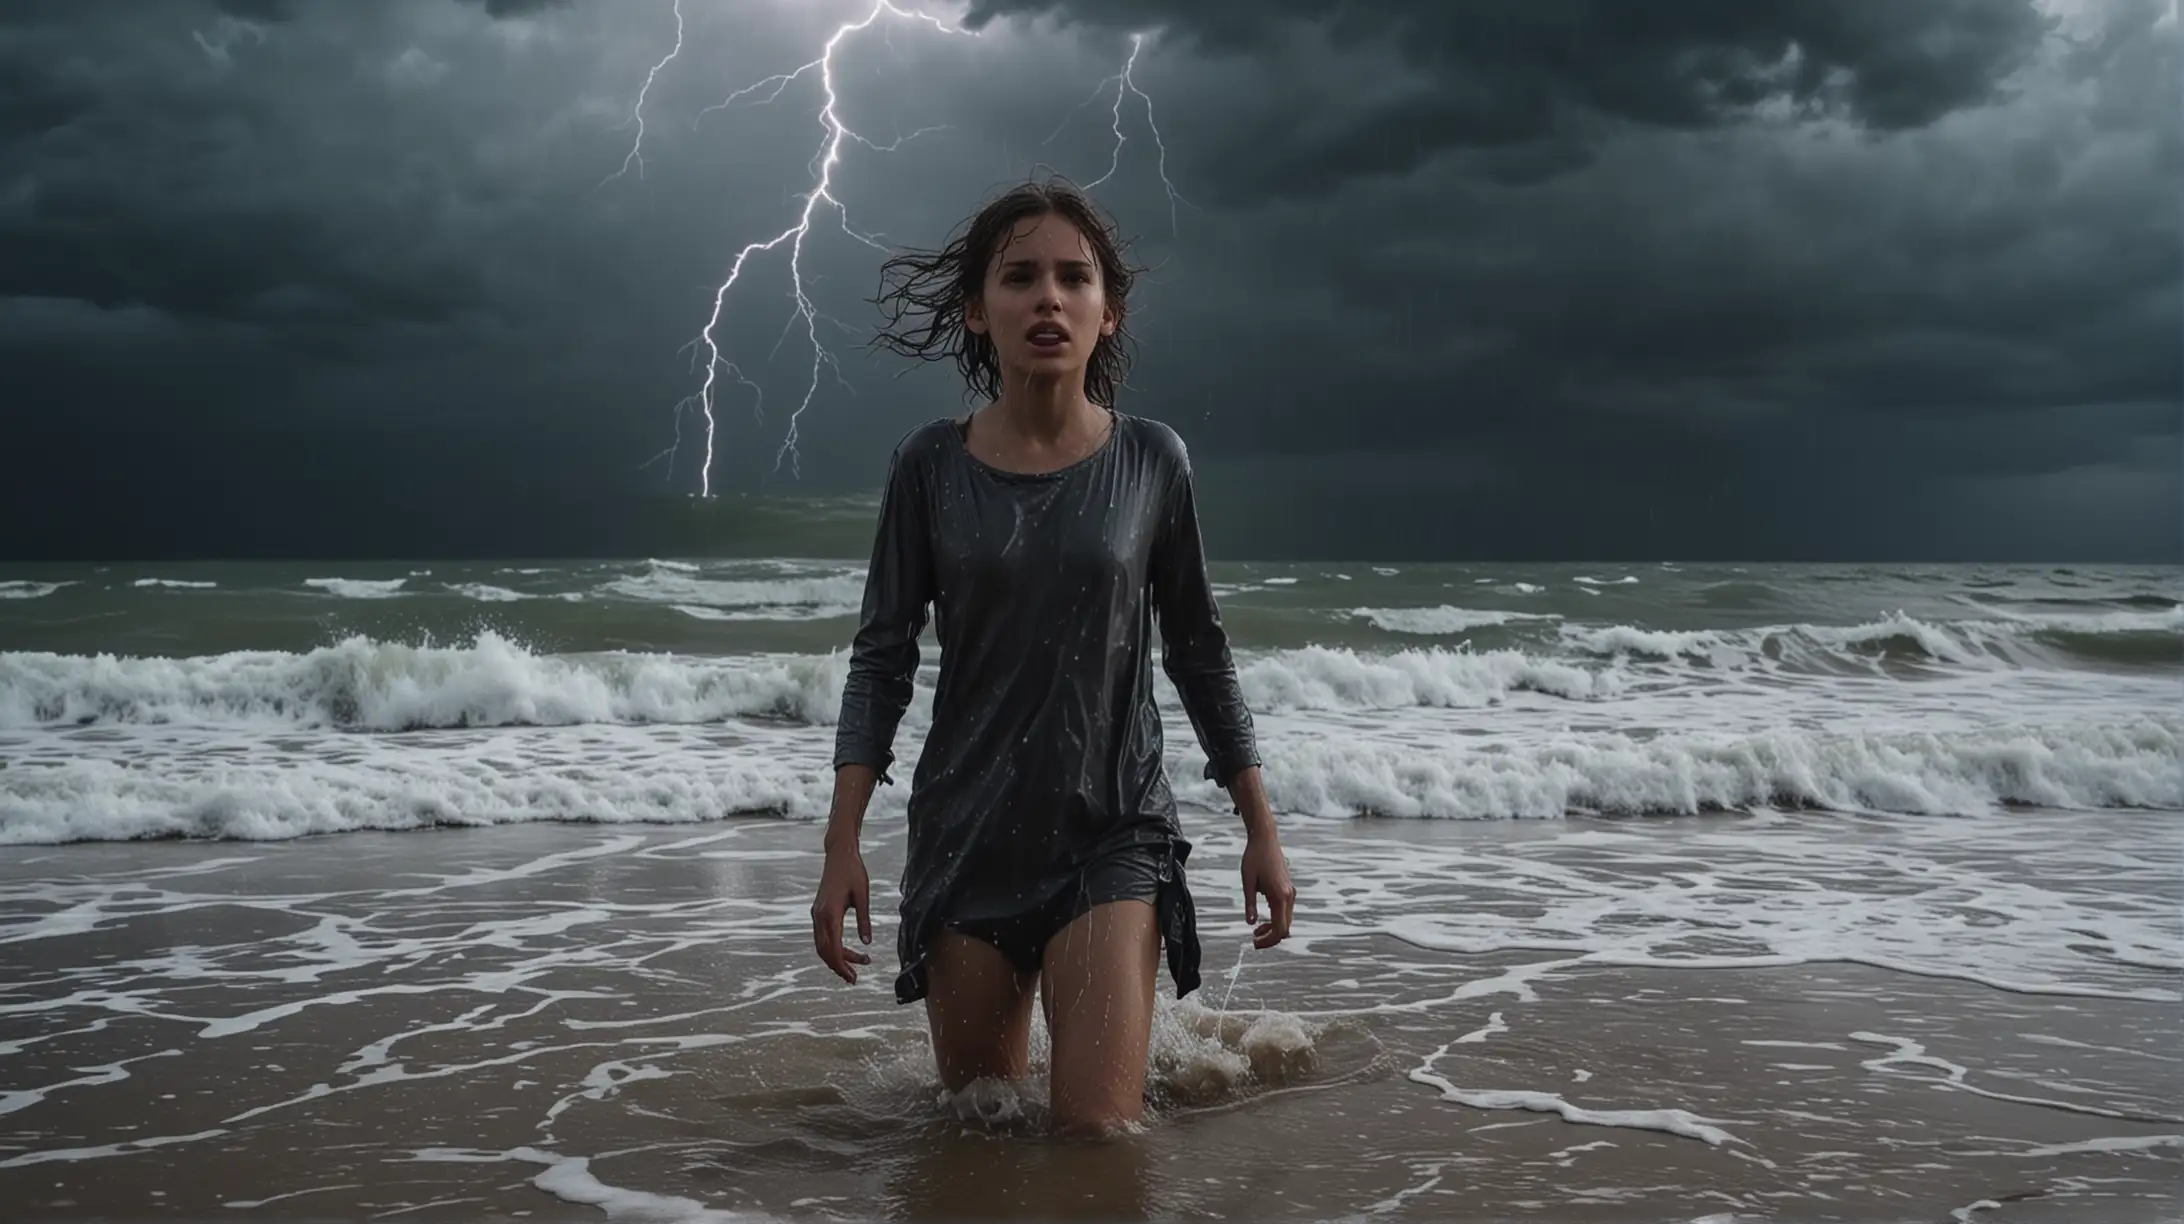 Dramatic Beach Scene Girl Emerging from Sea in Stormy Weather